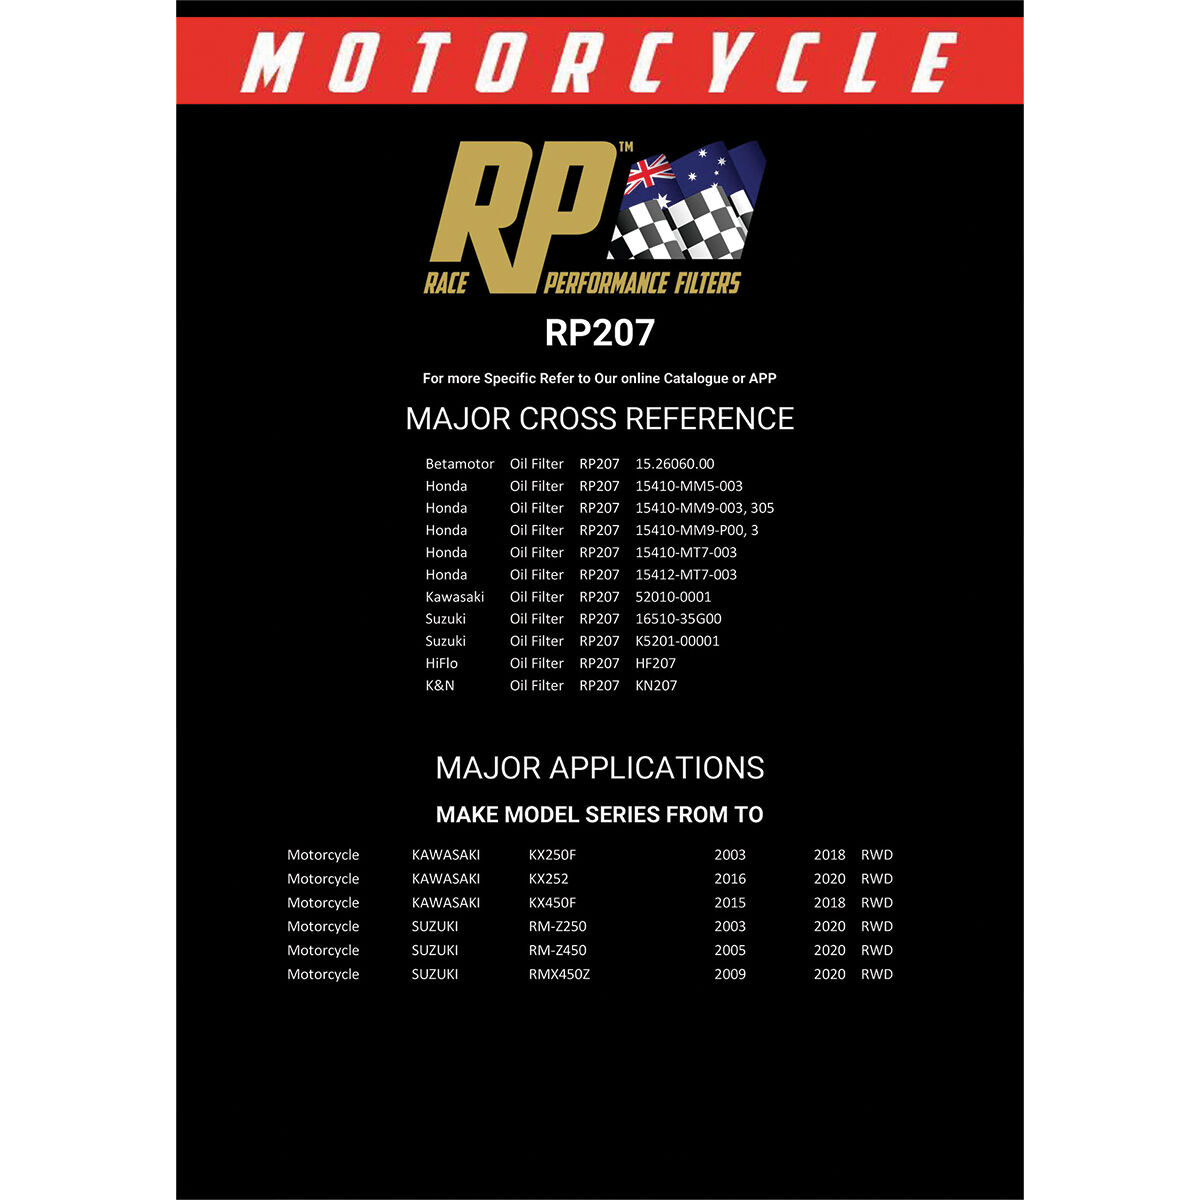 Race Performance Motorcycle Oil Filter RP207, , scaau_hi-res